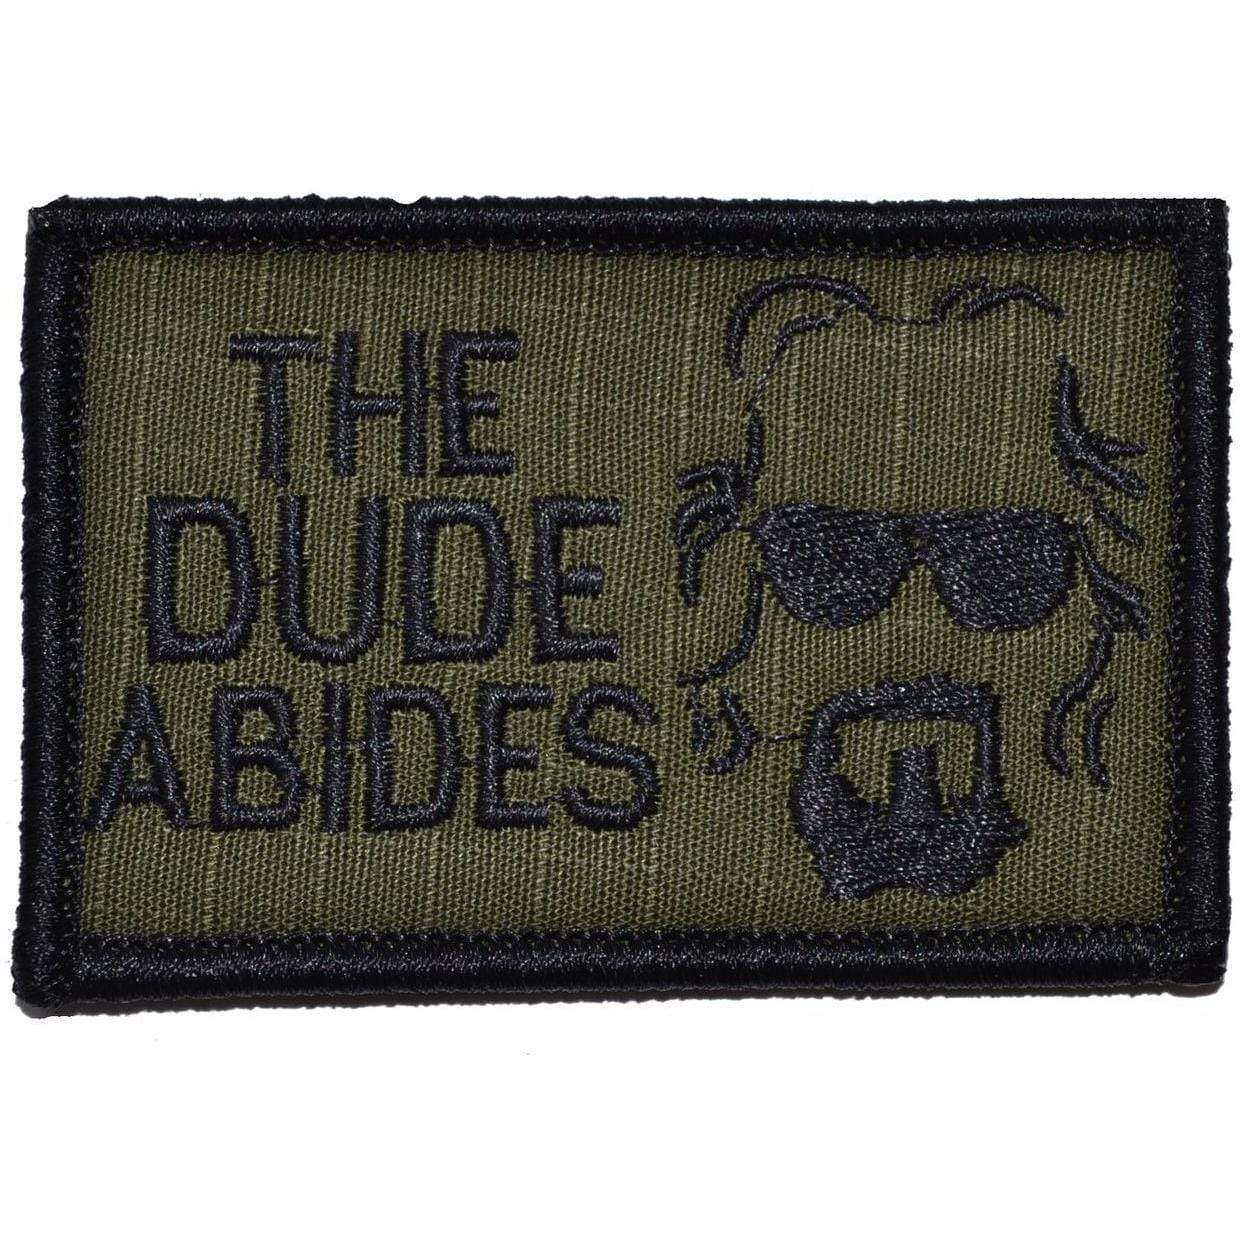 Tactical Gear Junkie Patches Olive Drab The Dude Abides, The Big Lebowski - 2x3 Patch